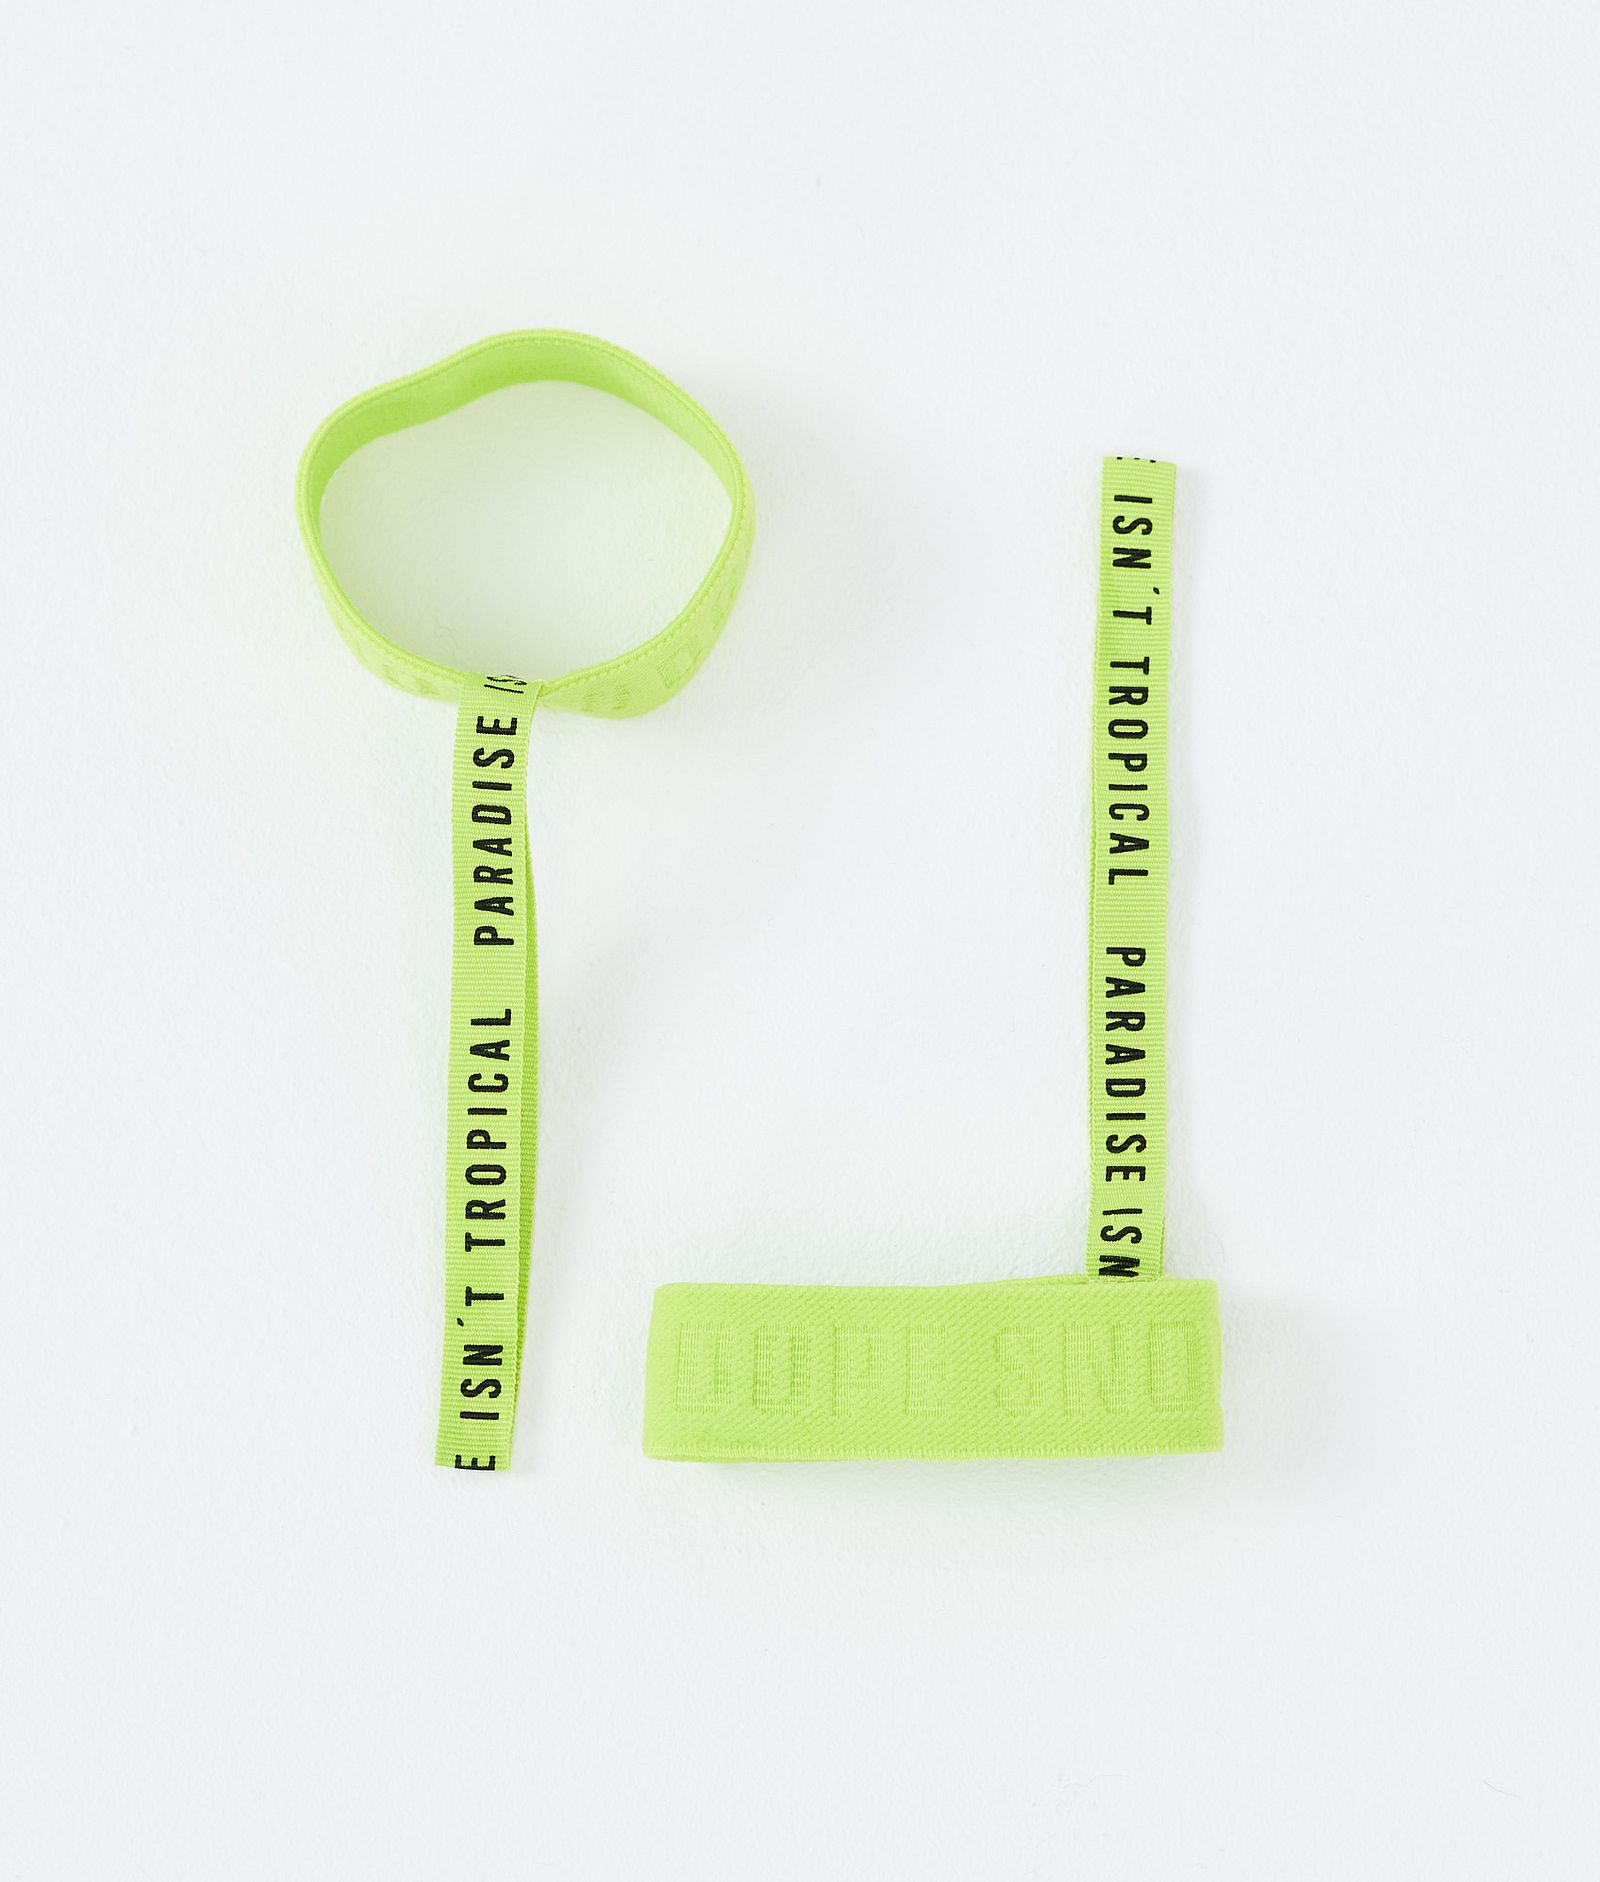 Wrist Band Replacement Parts Neon Yellow, Image 1 of 2